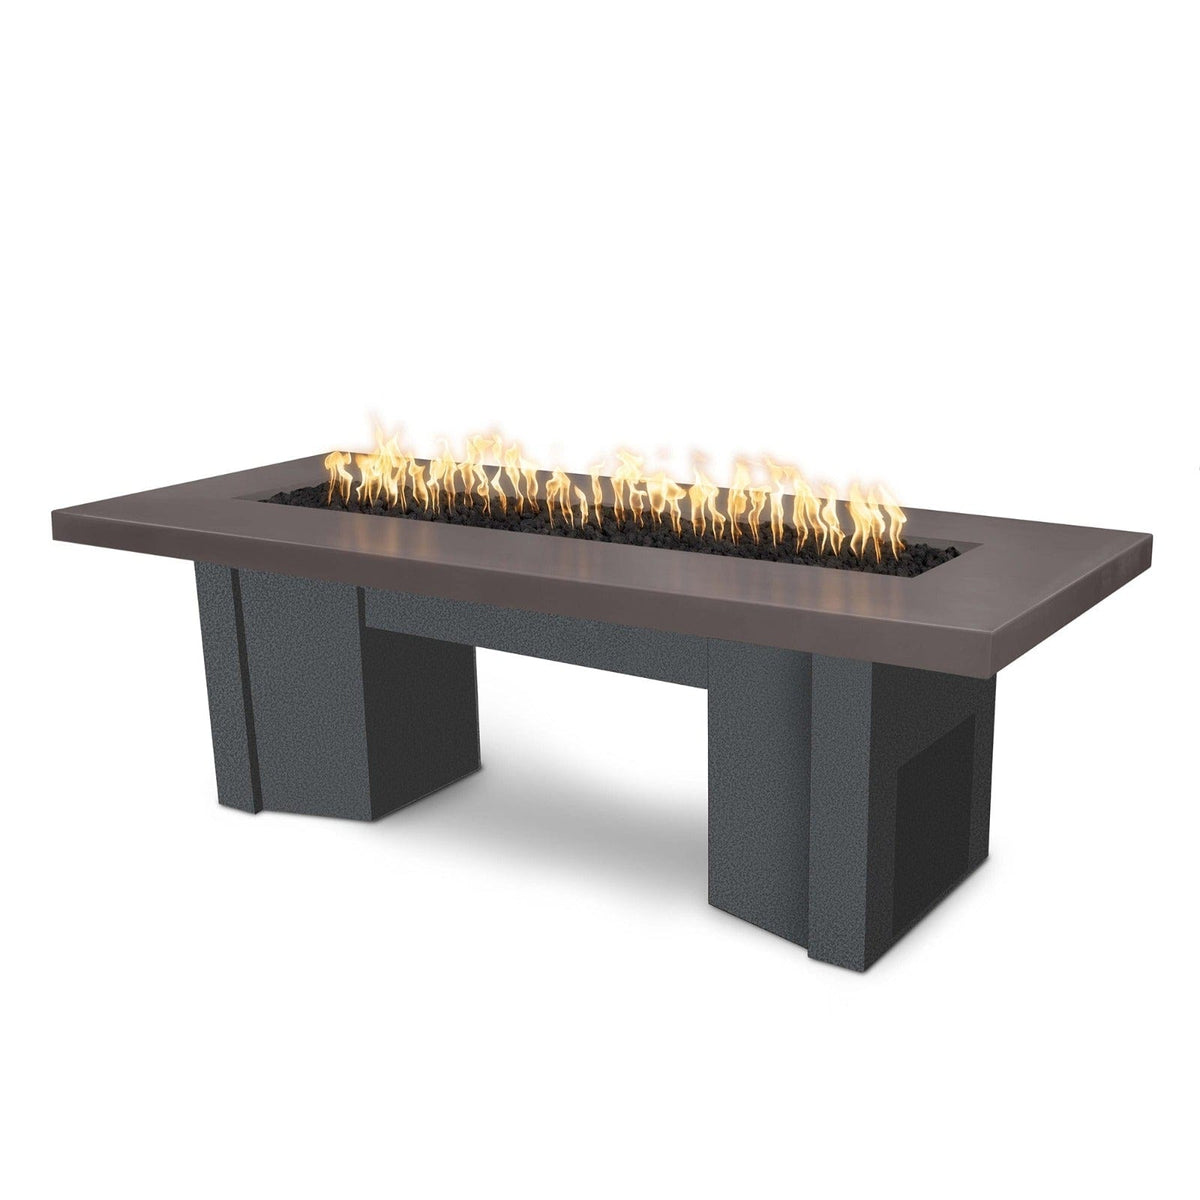 The Outdoor Plus Fire Features Chestnut (-CST) / Silver Vein Powder Coated Steel (-SLV) The Outdoor Plus 78&quot; Alameda Fire Table Smooth Concrete in Liquid Propane - Match Lit / OPT-ALMGFRC78-LP